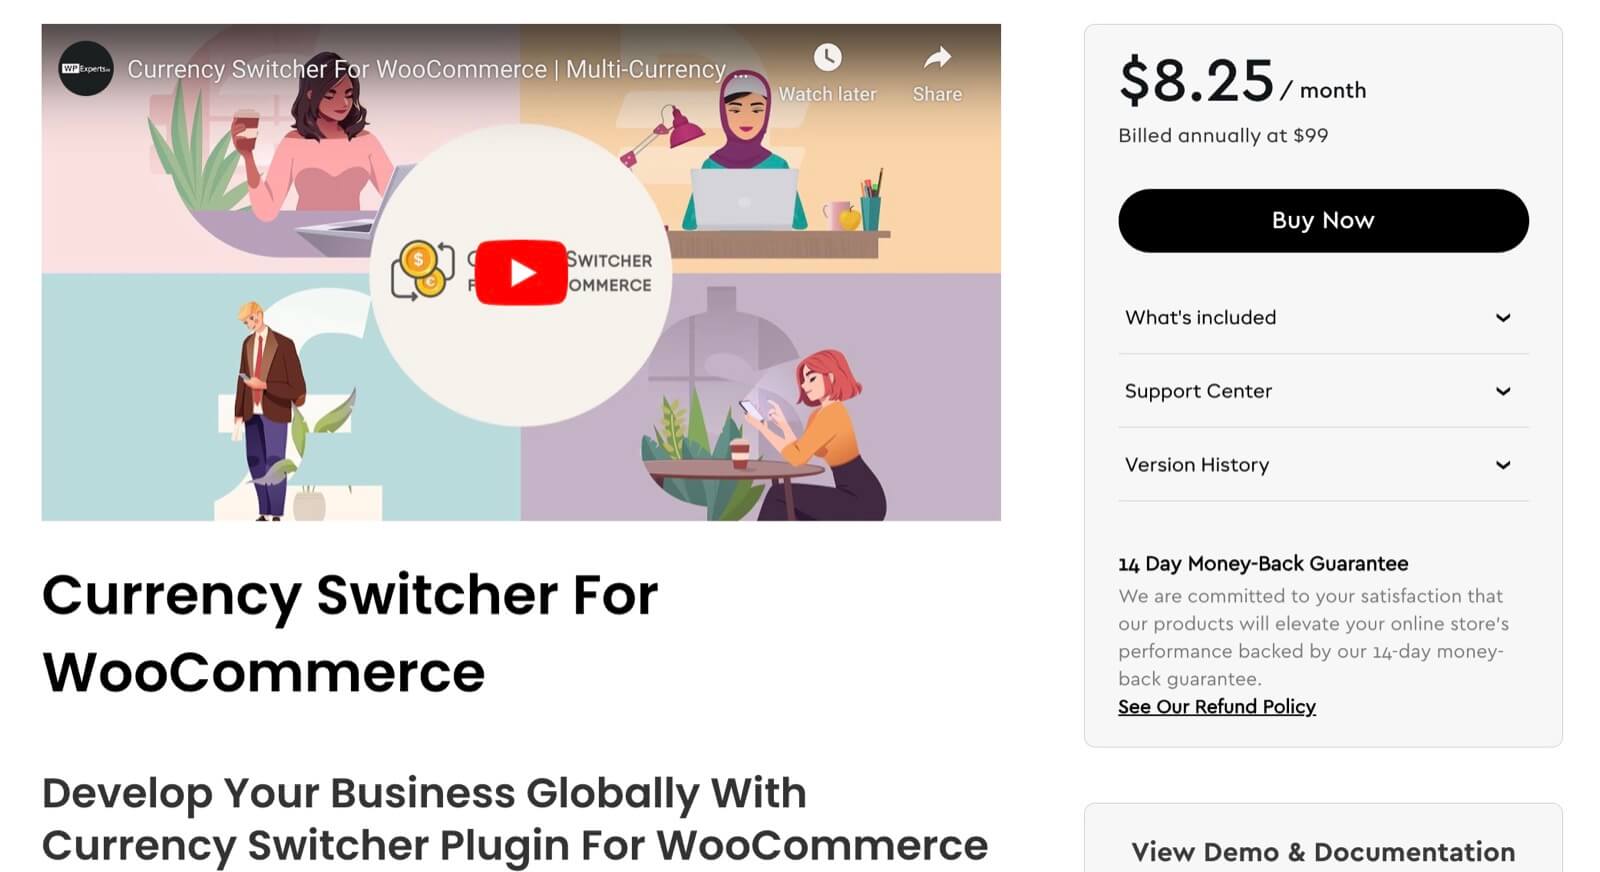 Currency switcher for WooCommerce by WPExperts